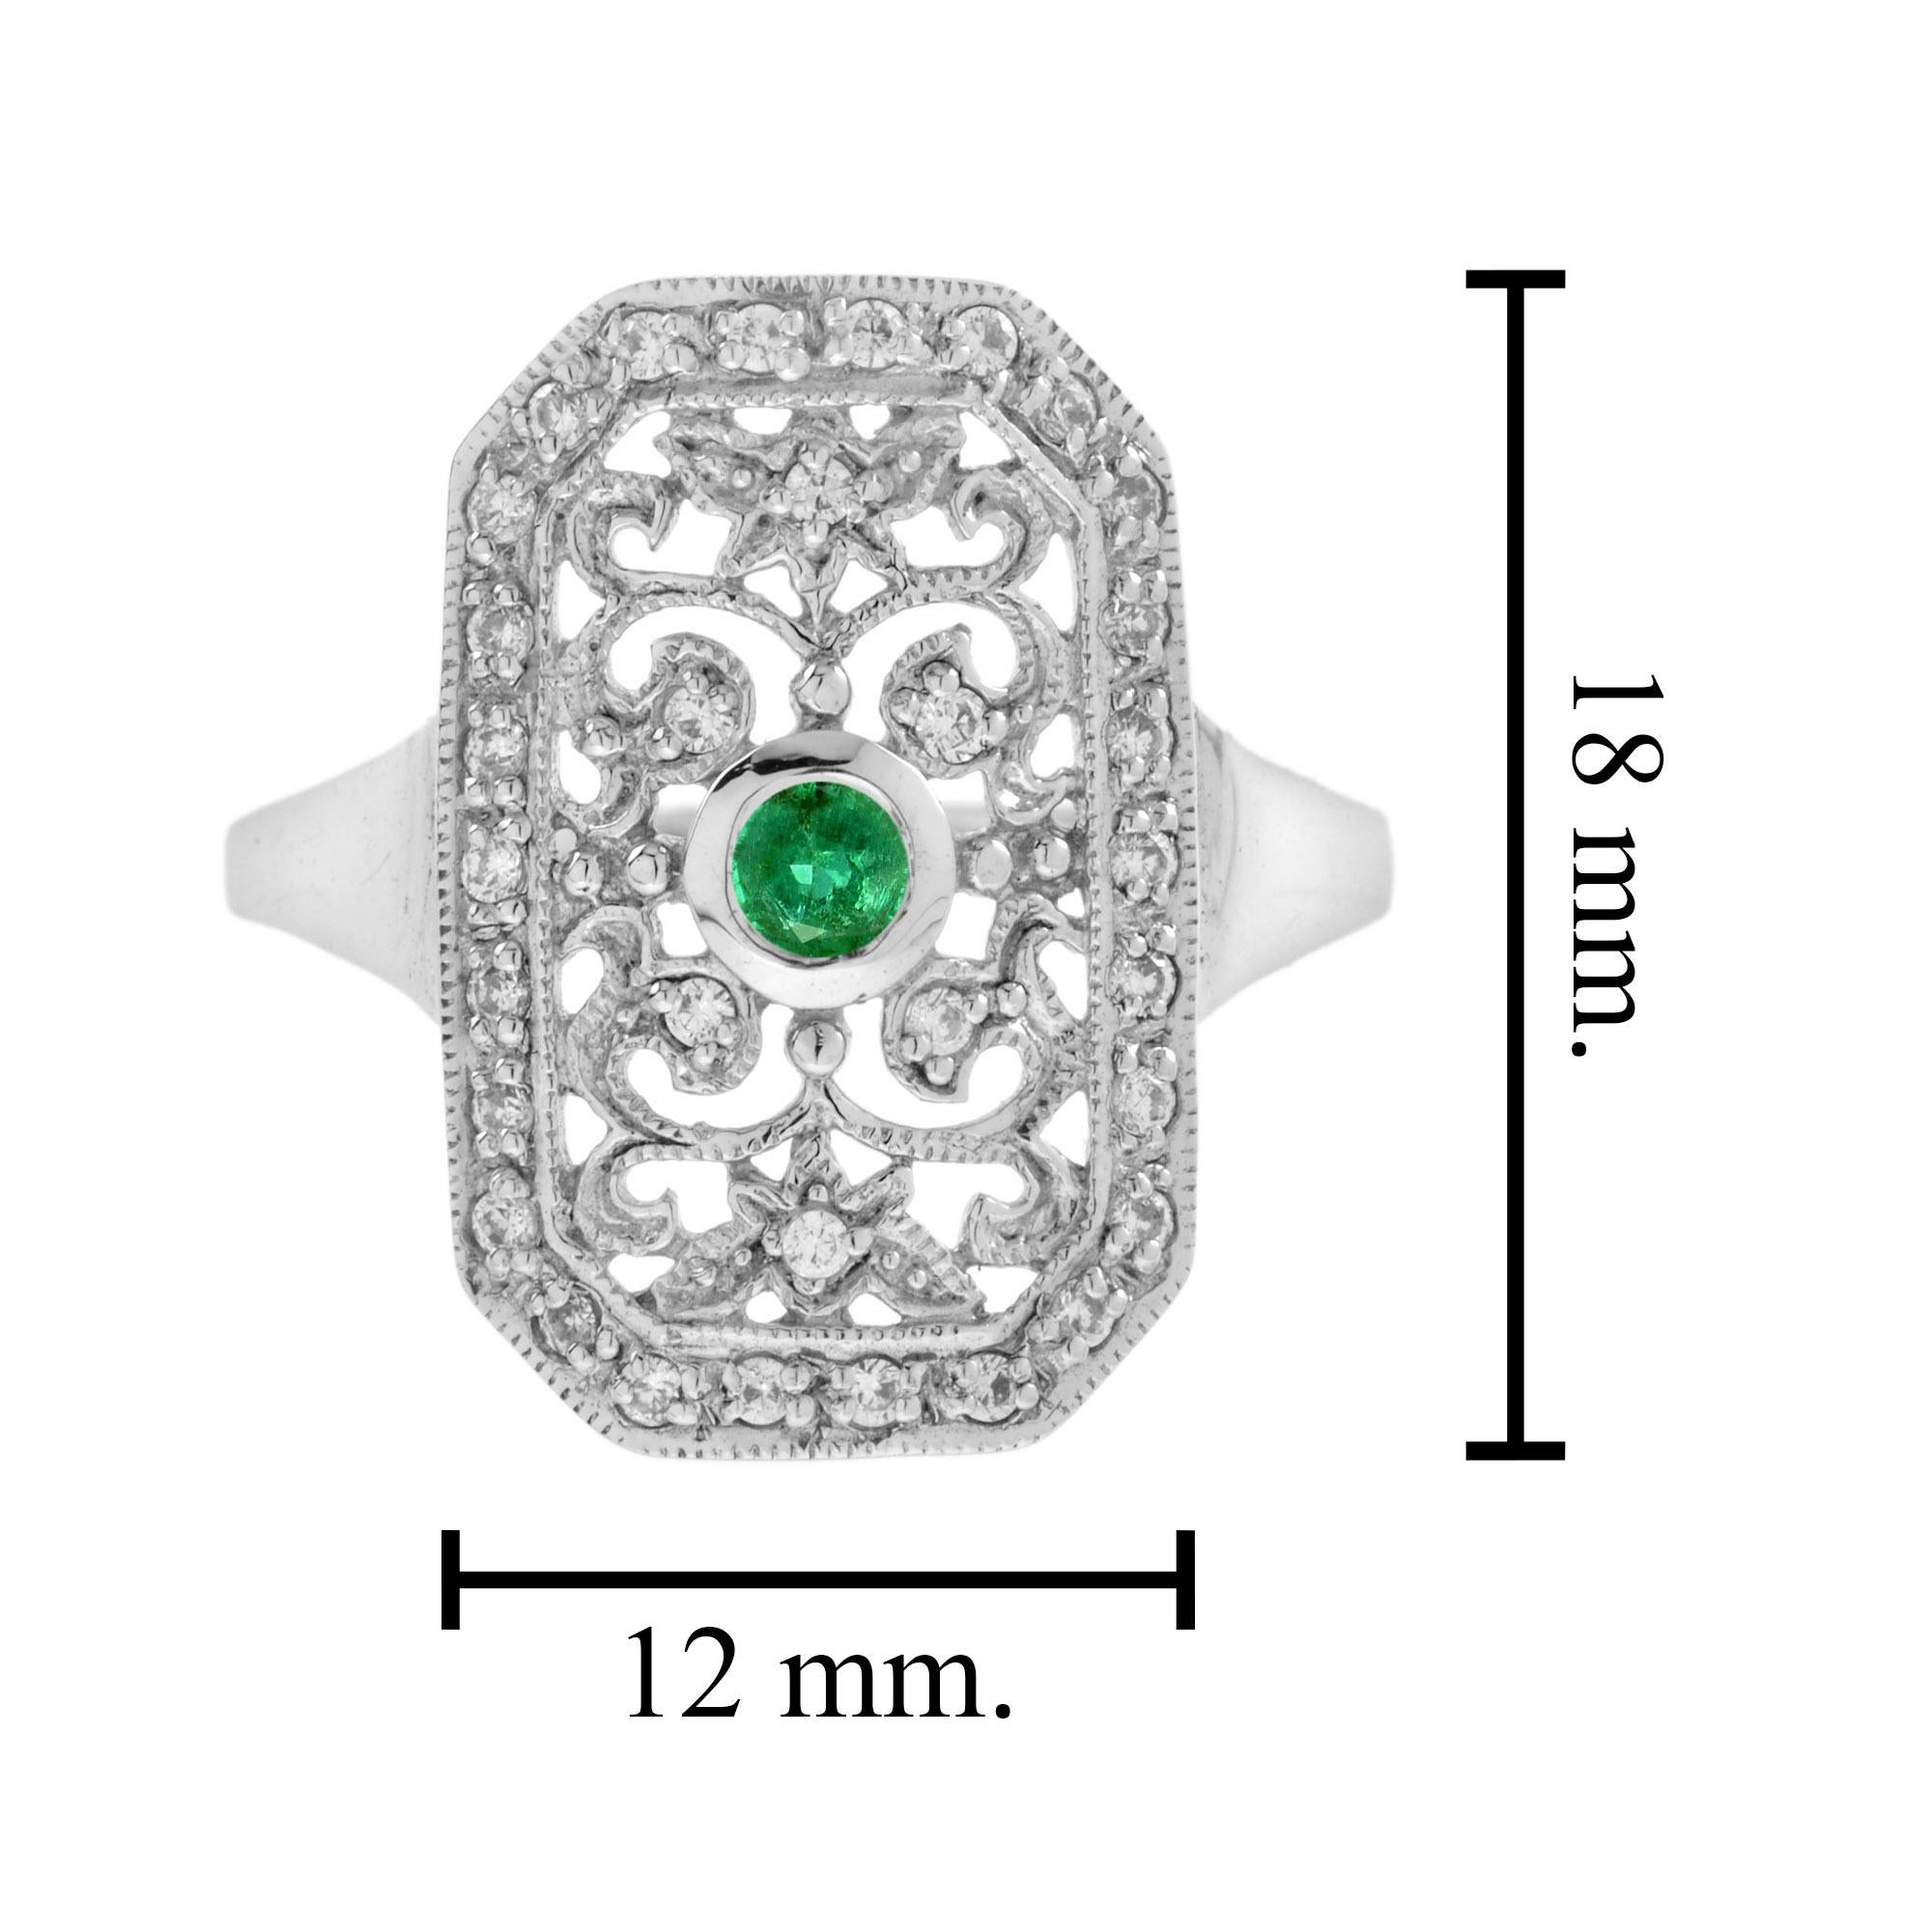 For Sale:  Emerald and Diamond Vintage Style Filigree Ring in 14K White Gold 6